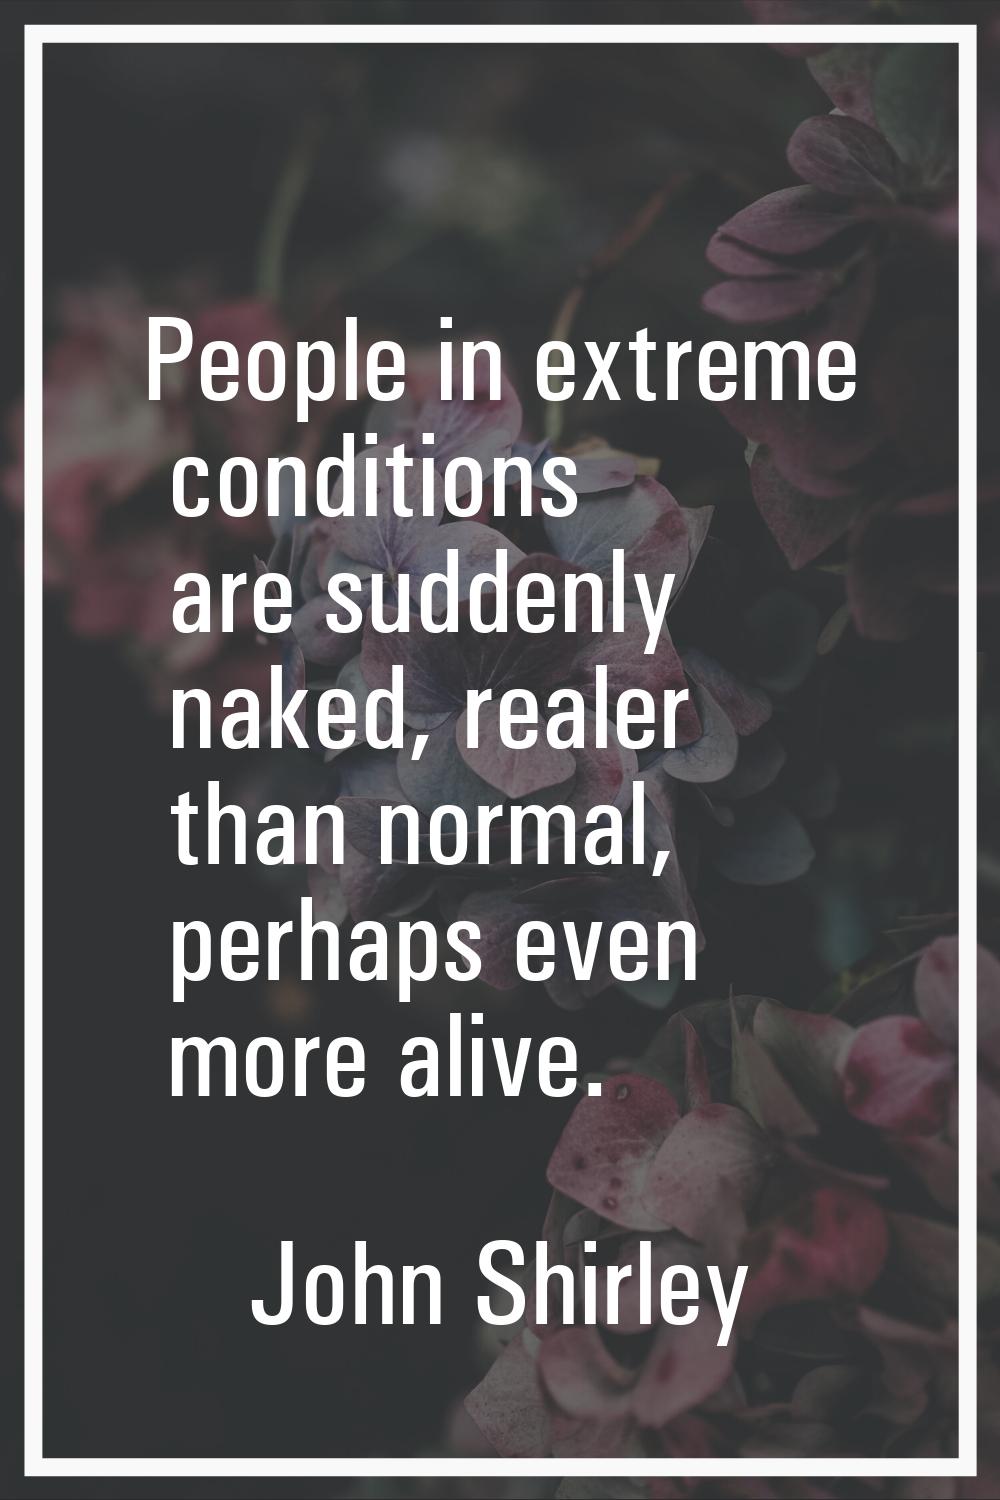 People in extreme conditions are suddenly naked, realer than normal, perhaps even more alive.